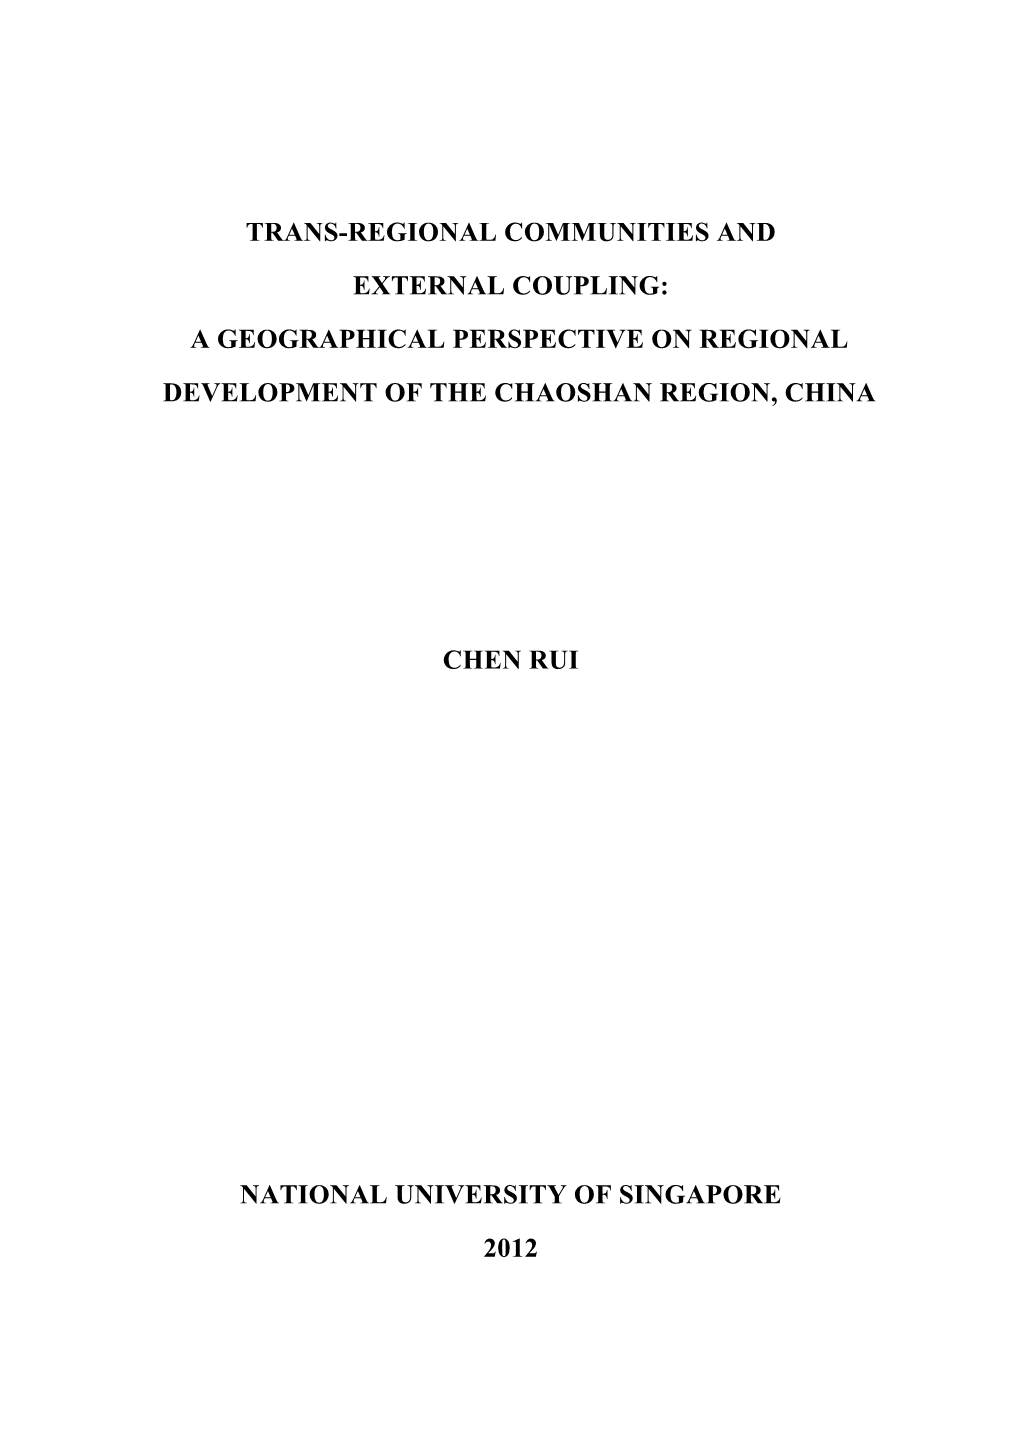 Trans-Regional Communities and External Coupling: a Geographical Perspective on Regional Development of the Chaoshan Region, China